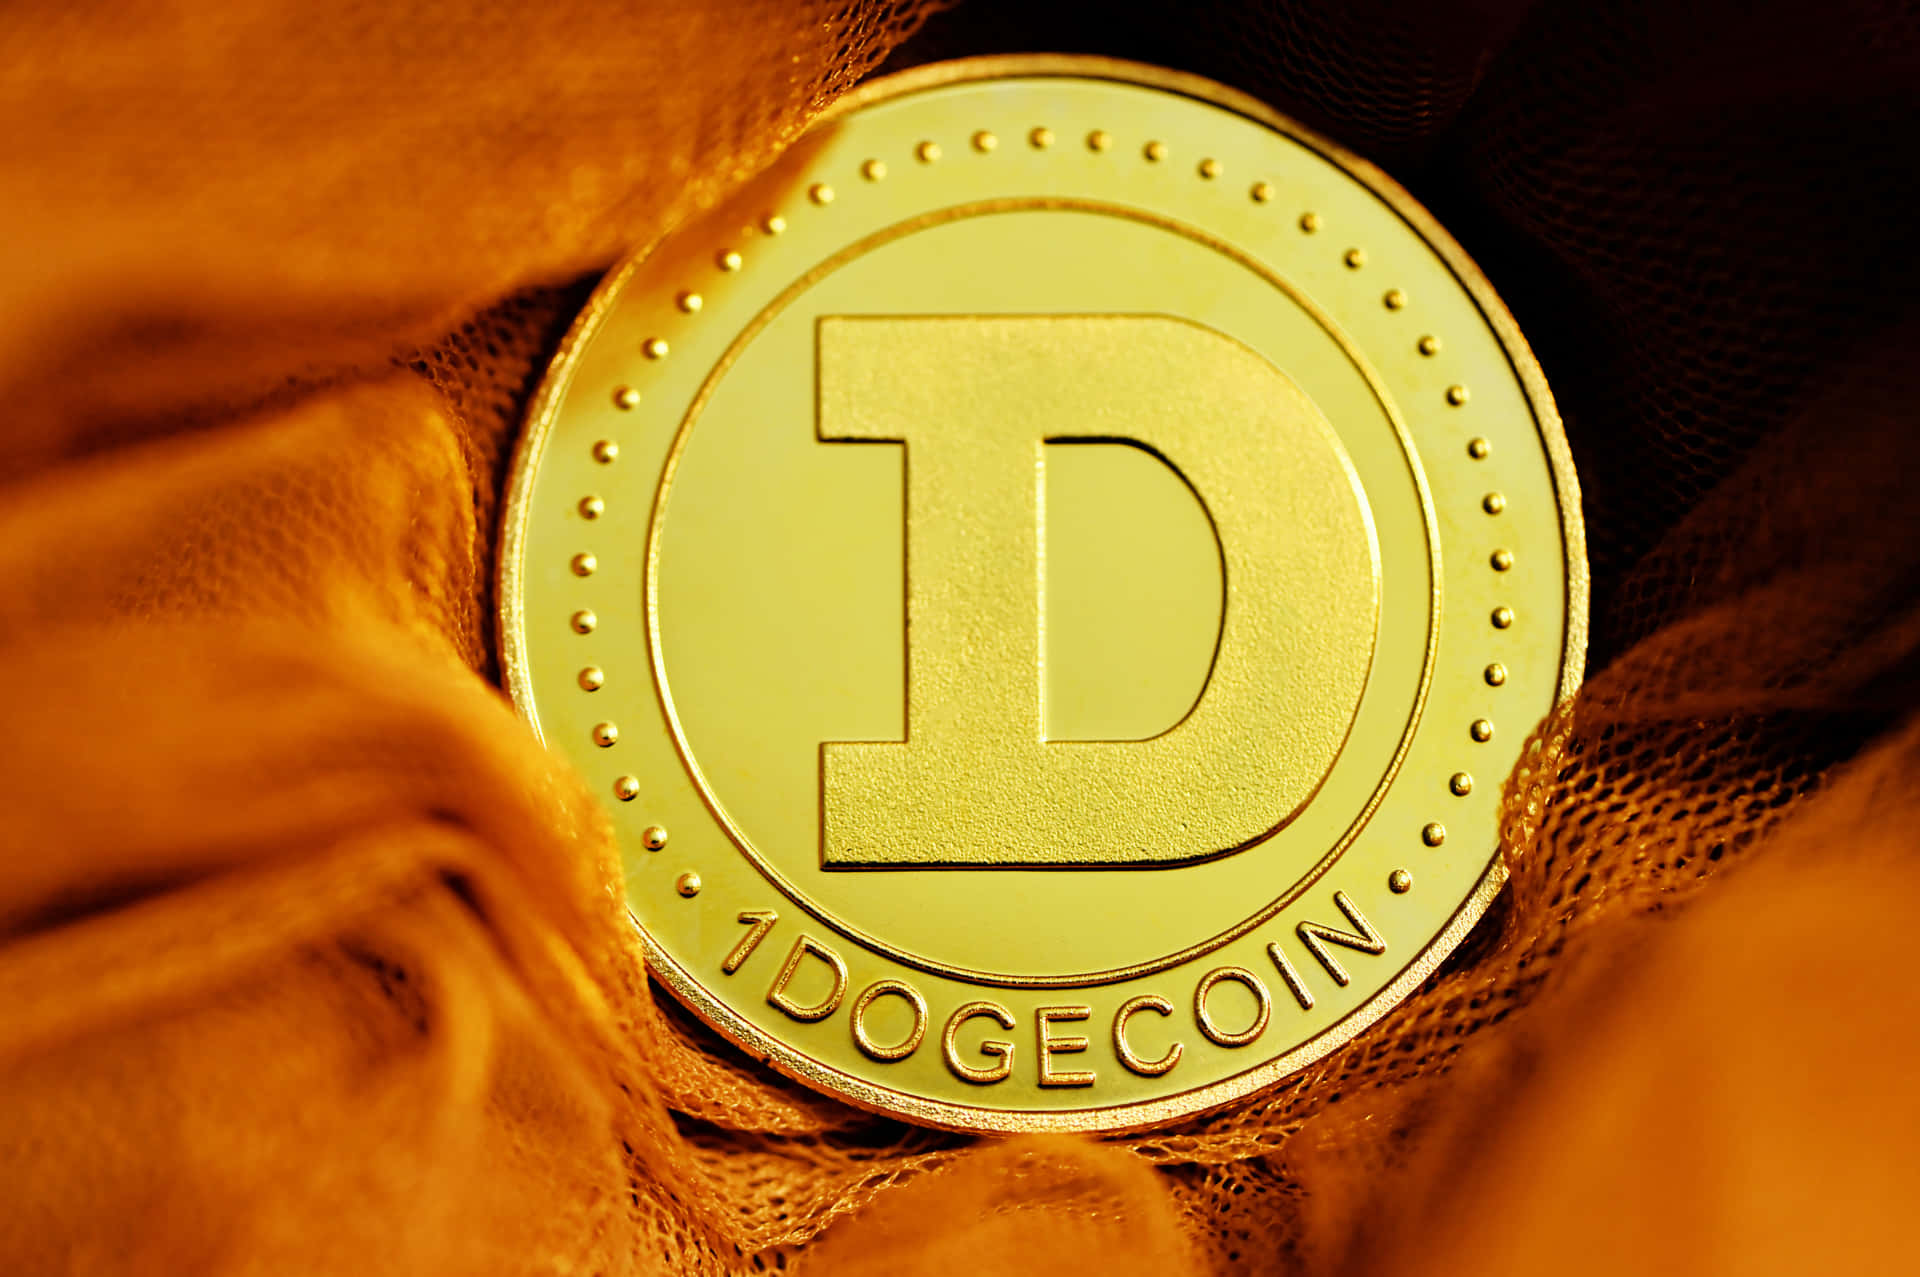 Dogecoin: The Popular Cryptocurrency's Journey to the Moon